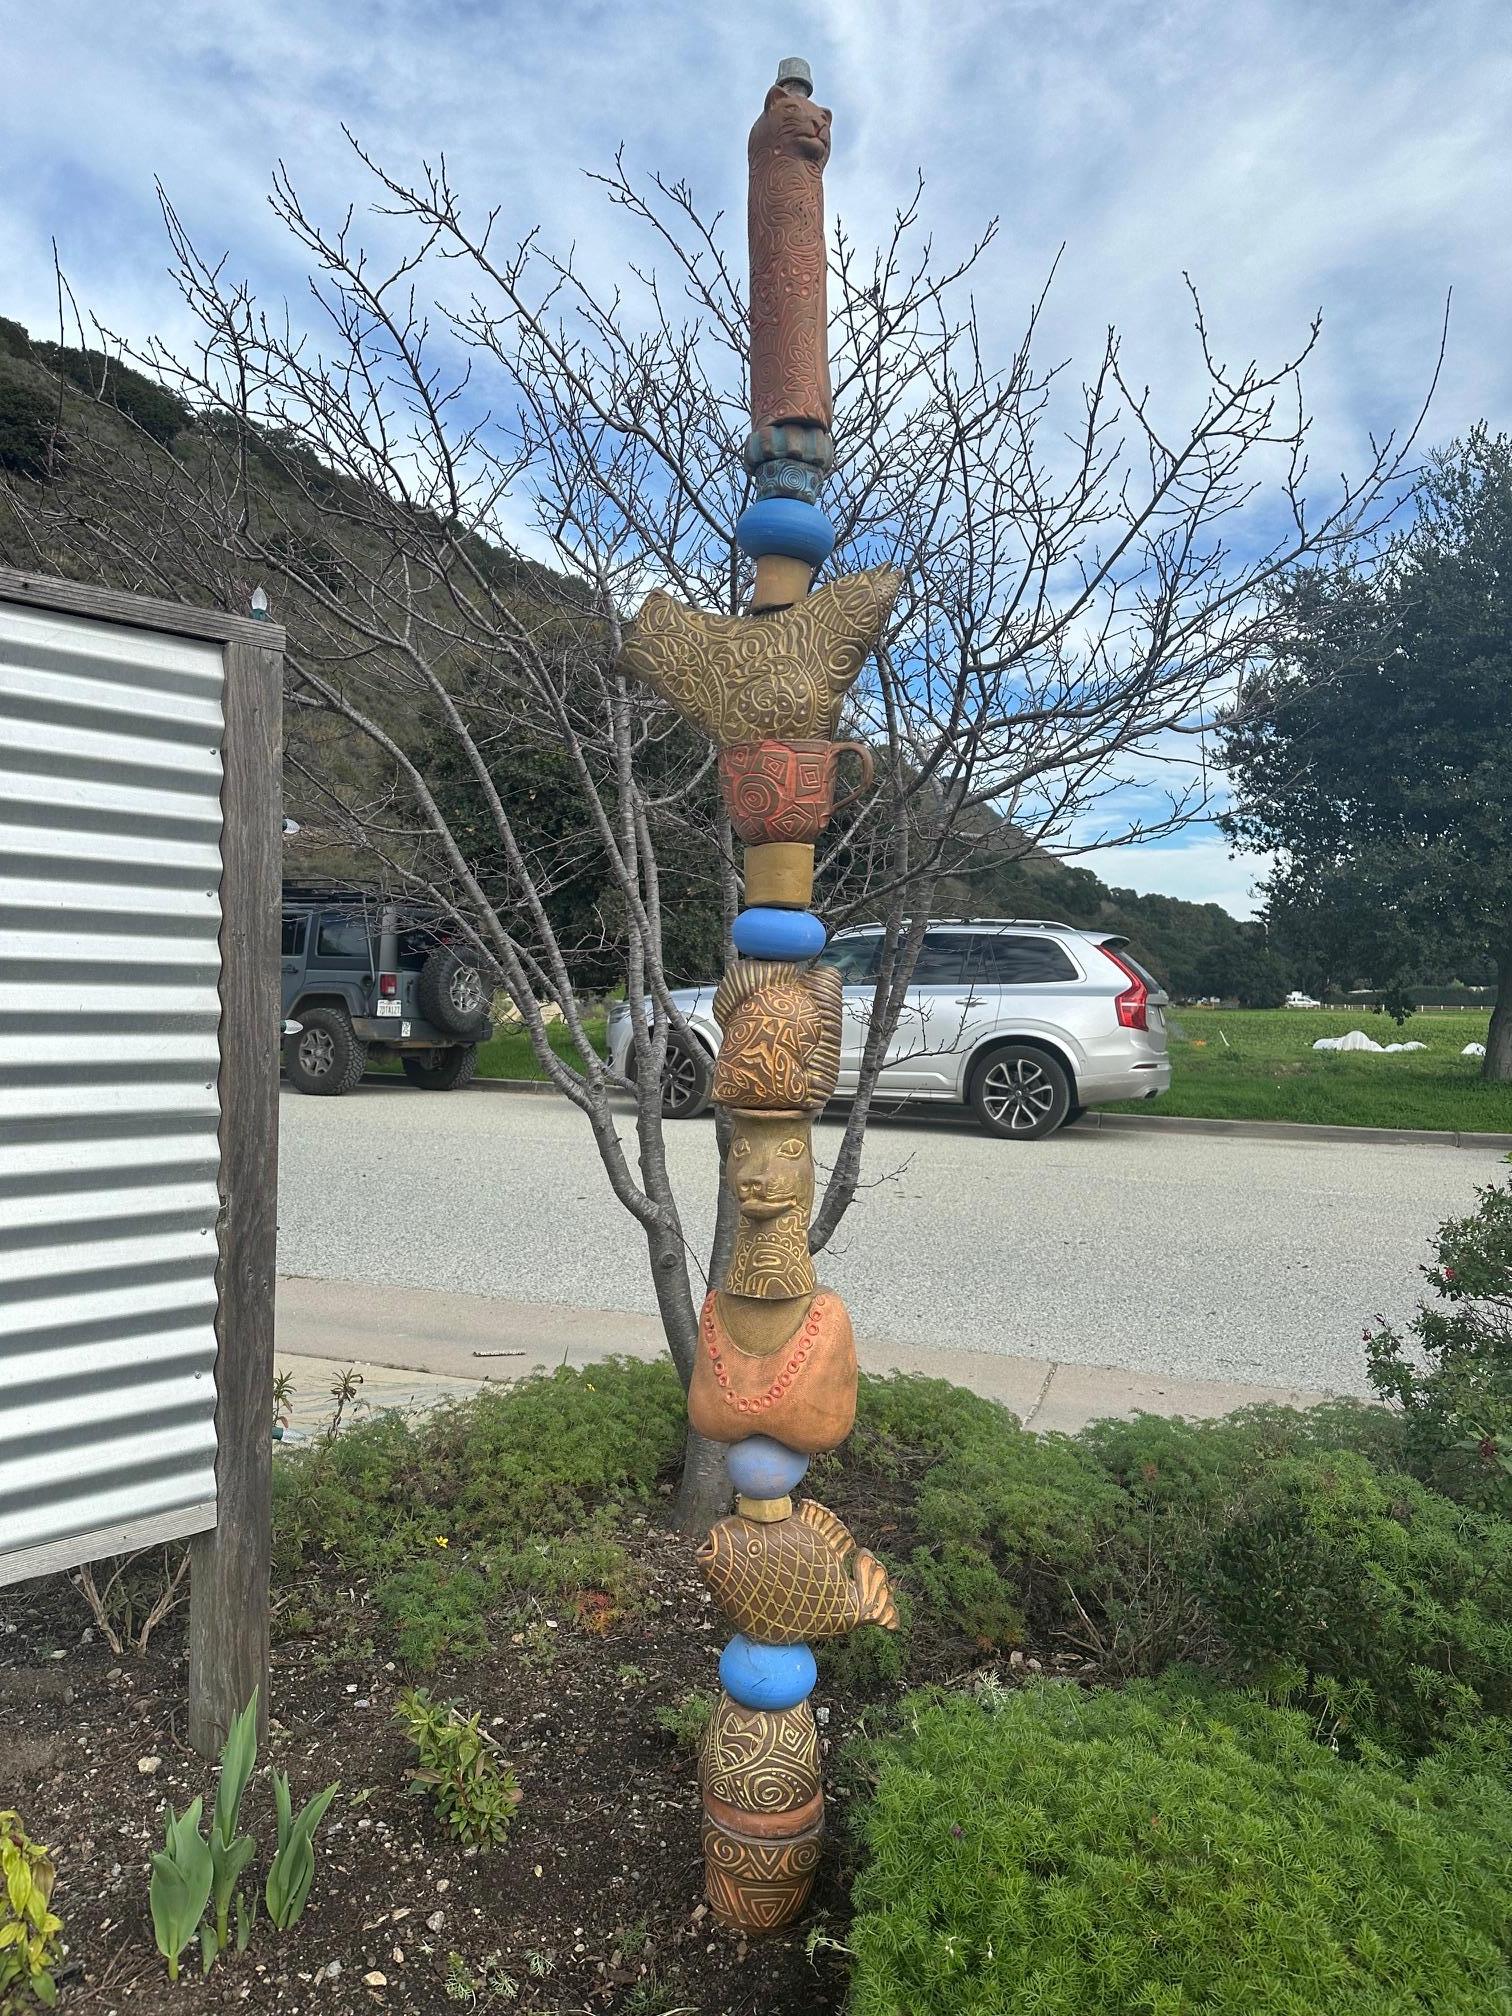 This Totem by Marc Zimmerman is currently on display at Earthbound Farm, nestled in California's Carmel Valley.

--
"My natural flow with clay stems from my first artistic passion; pottery in the 1960’s - 70’s in Venice Beach, California. A 40 year